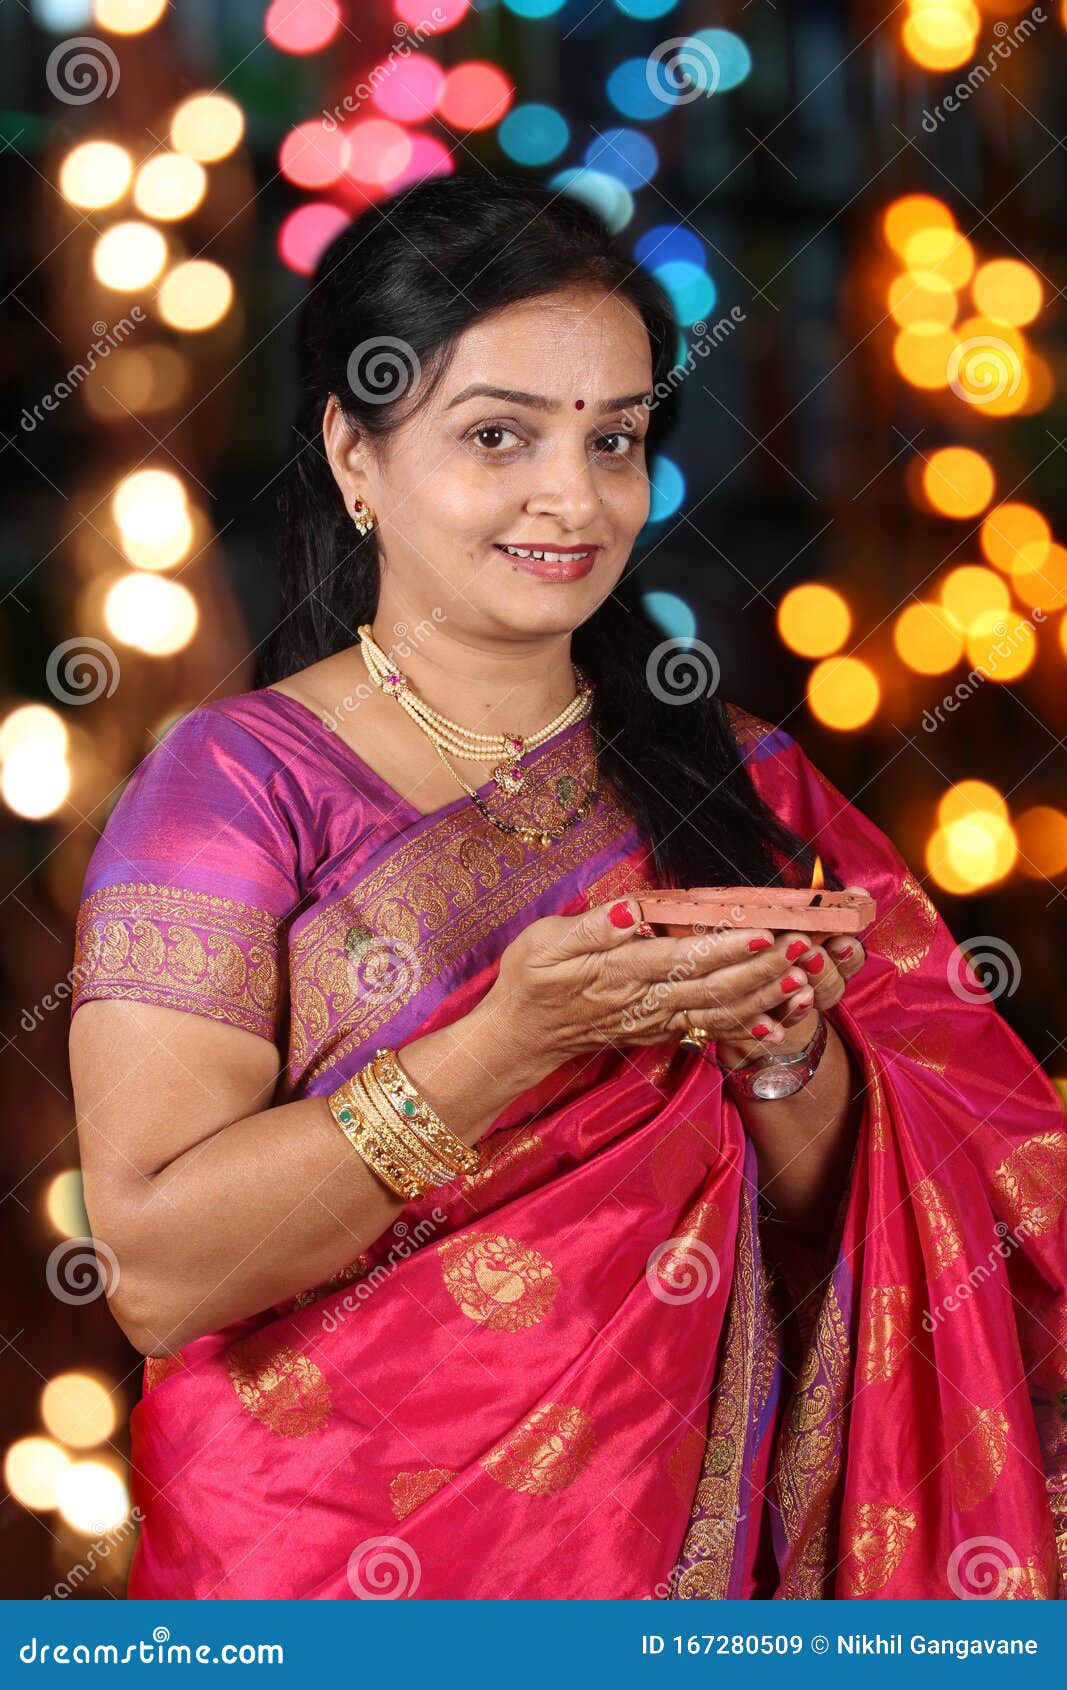 Indian Woman in Diwali Festival Stock Image - Image of culture, female:  167280509